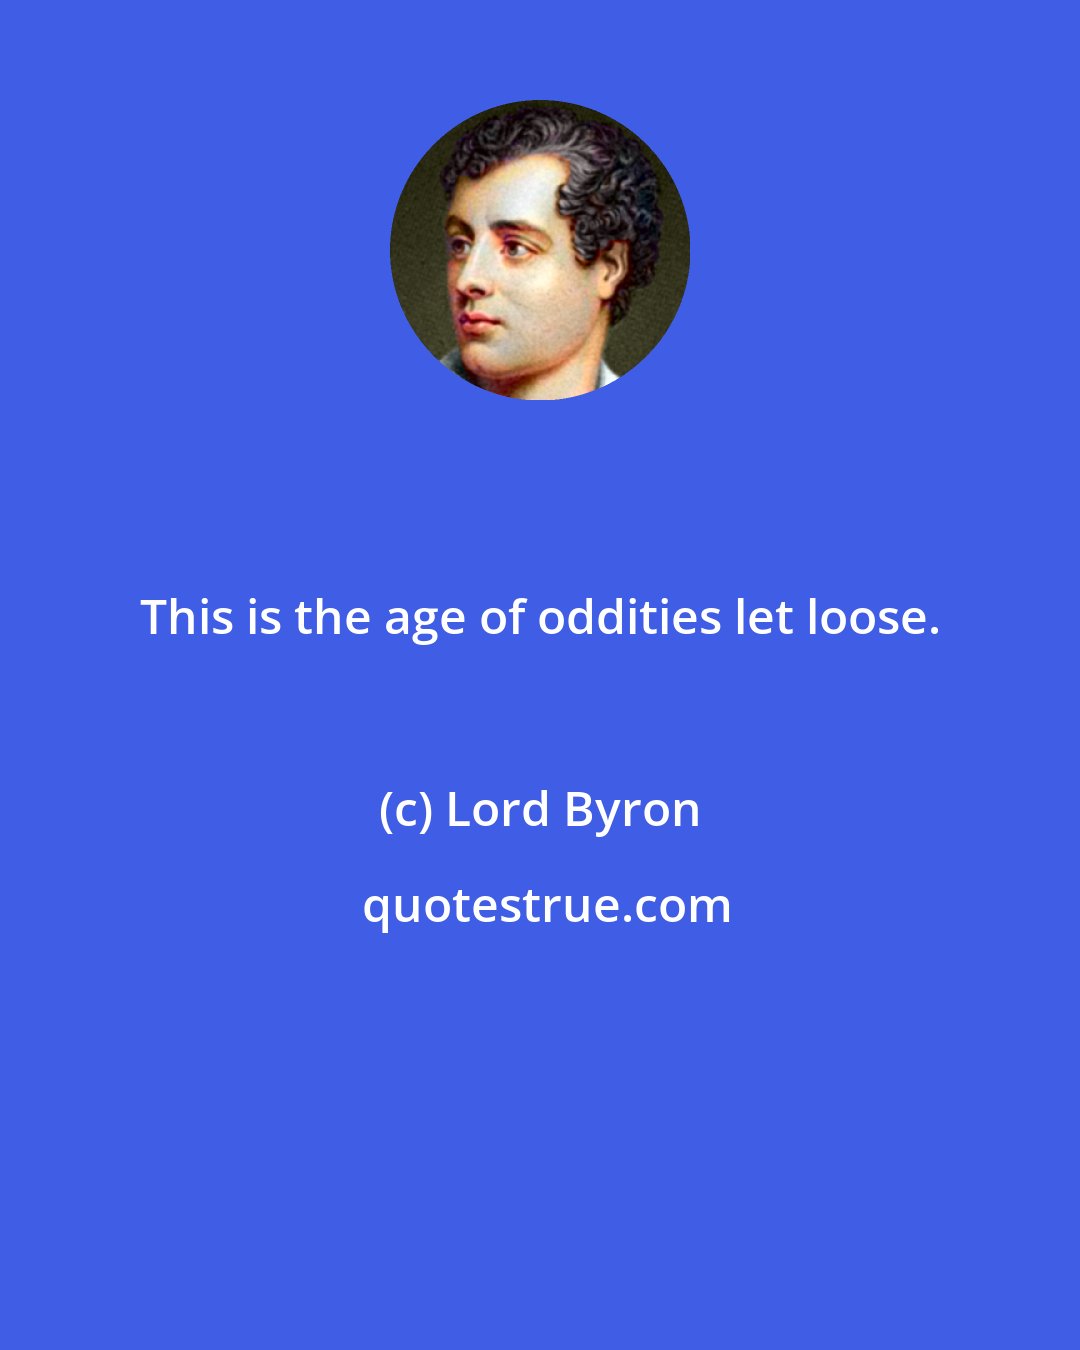 Lord Byron: This is the age of oddities let loose.